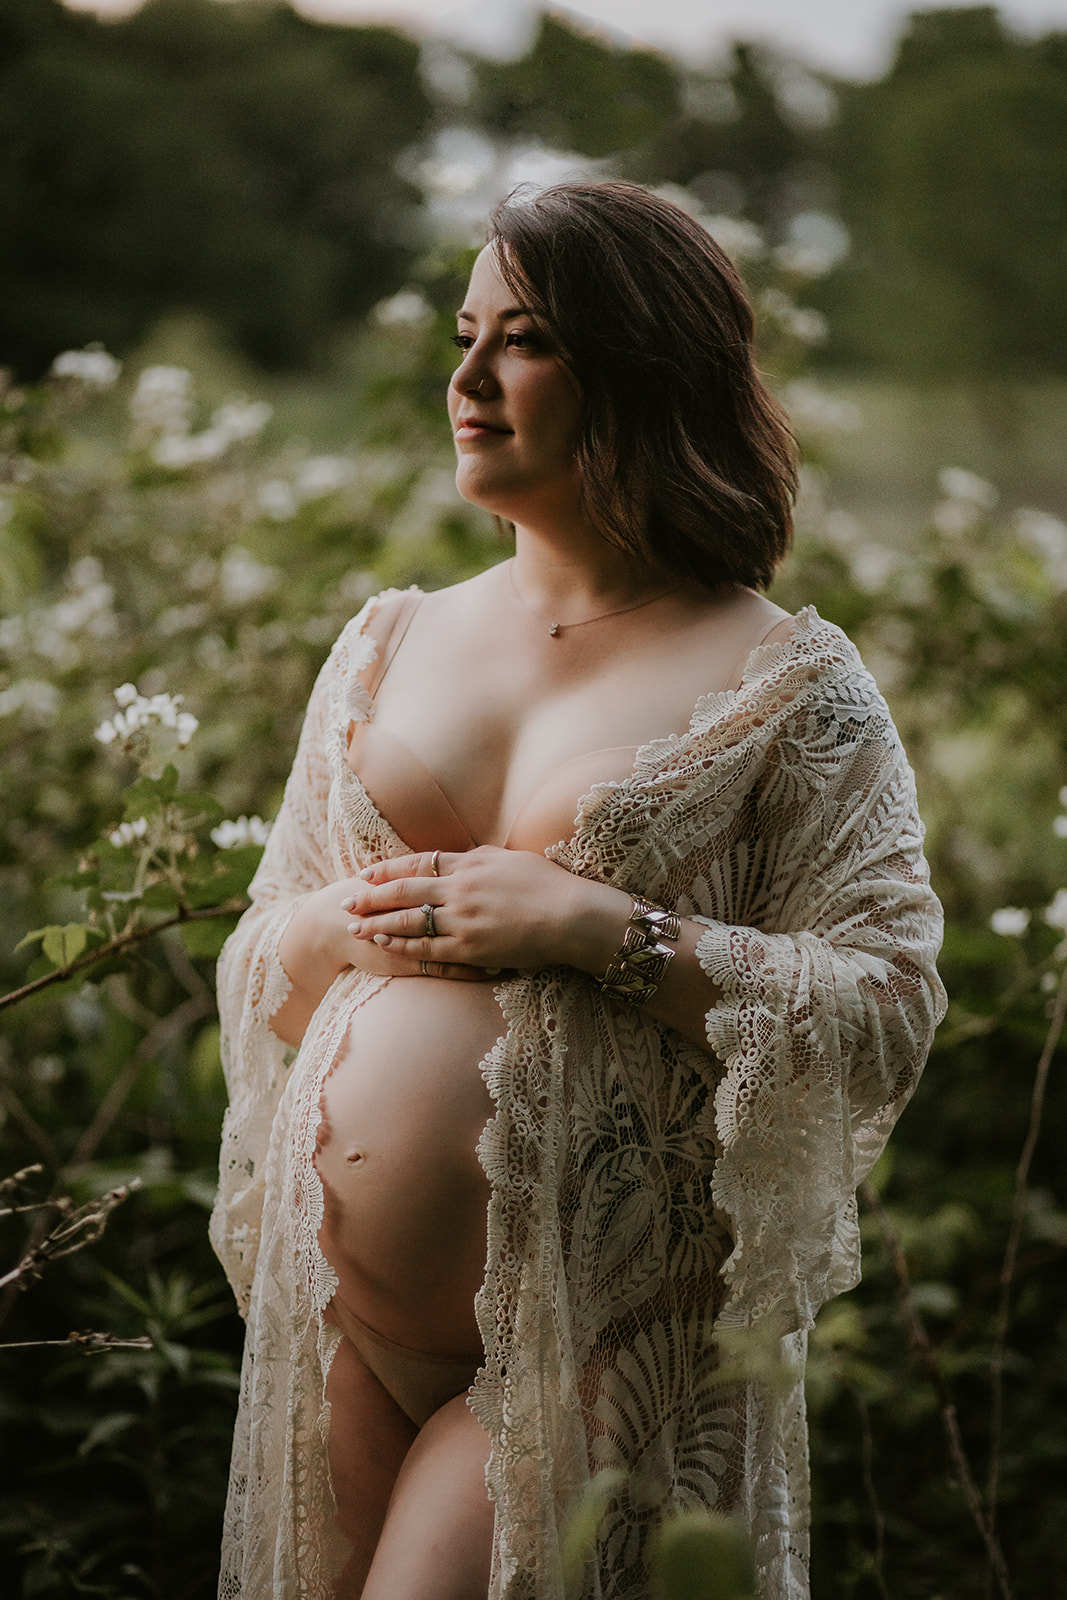 Pregnant woman in an ivory lace robe with her hands placed on her belly next to blackberry bushes